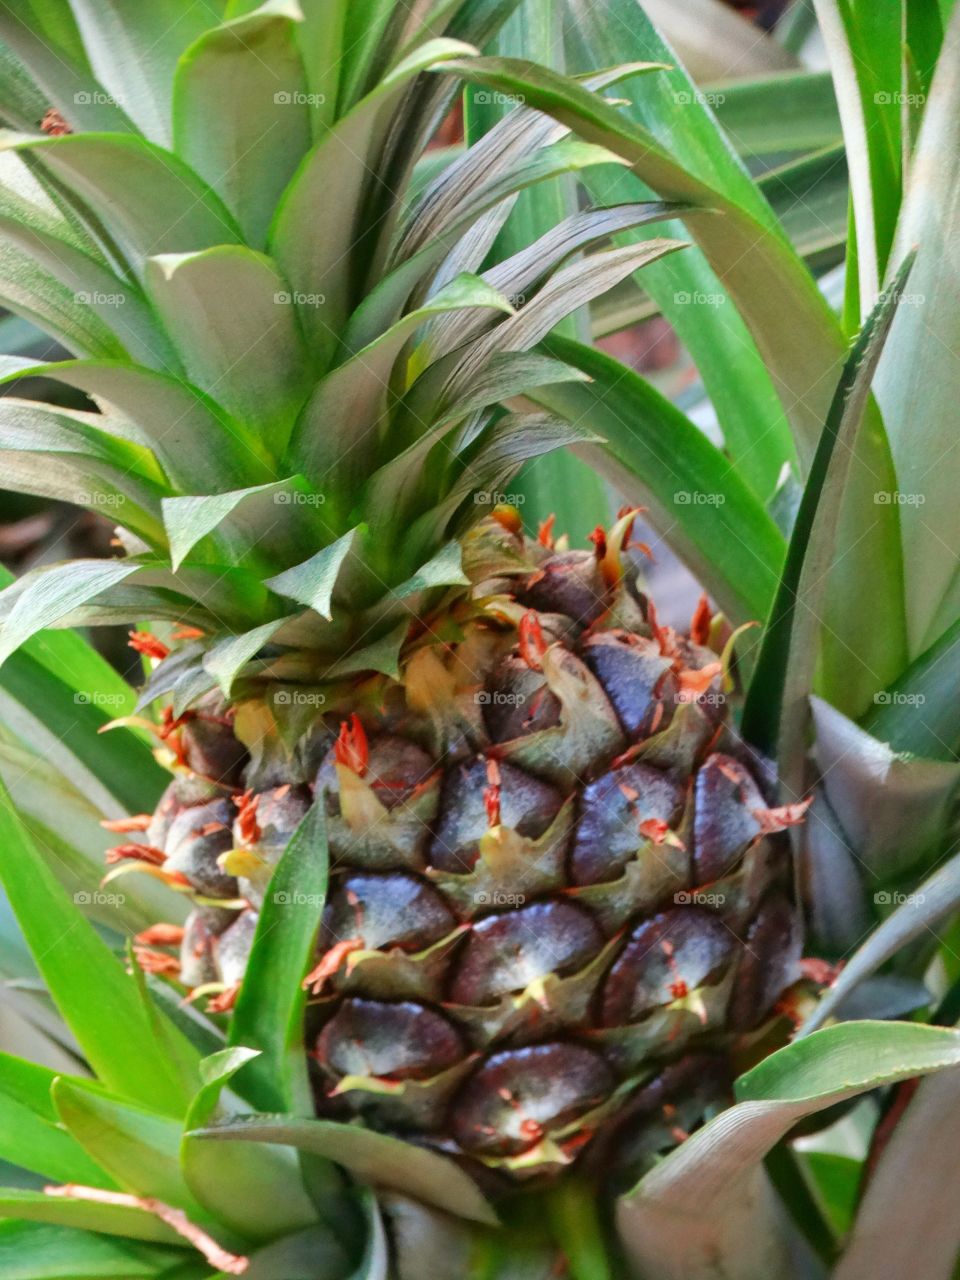 Pineapple Growing In The Wild
